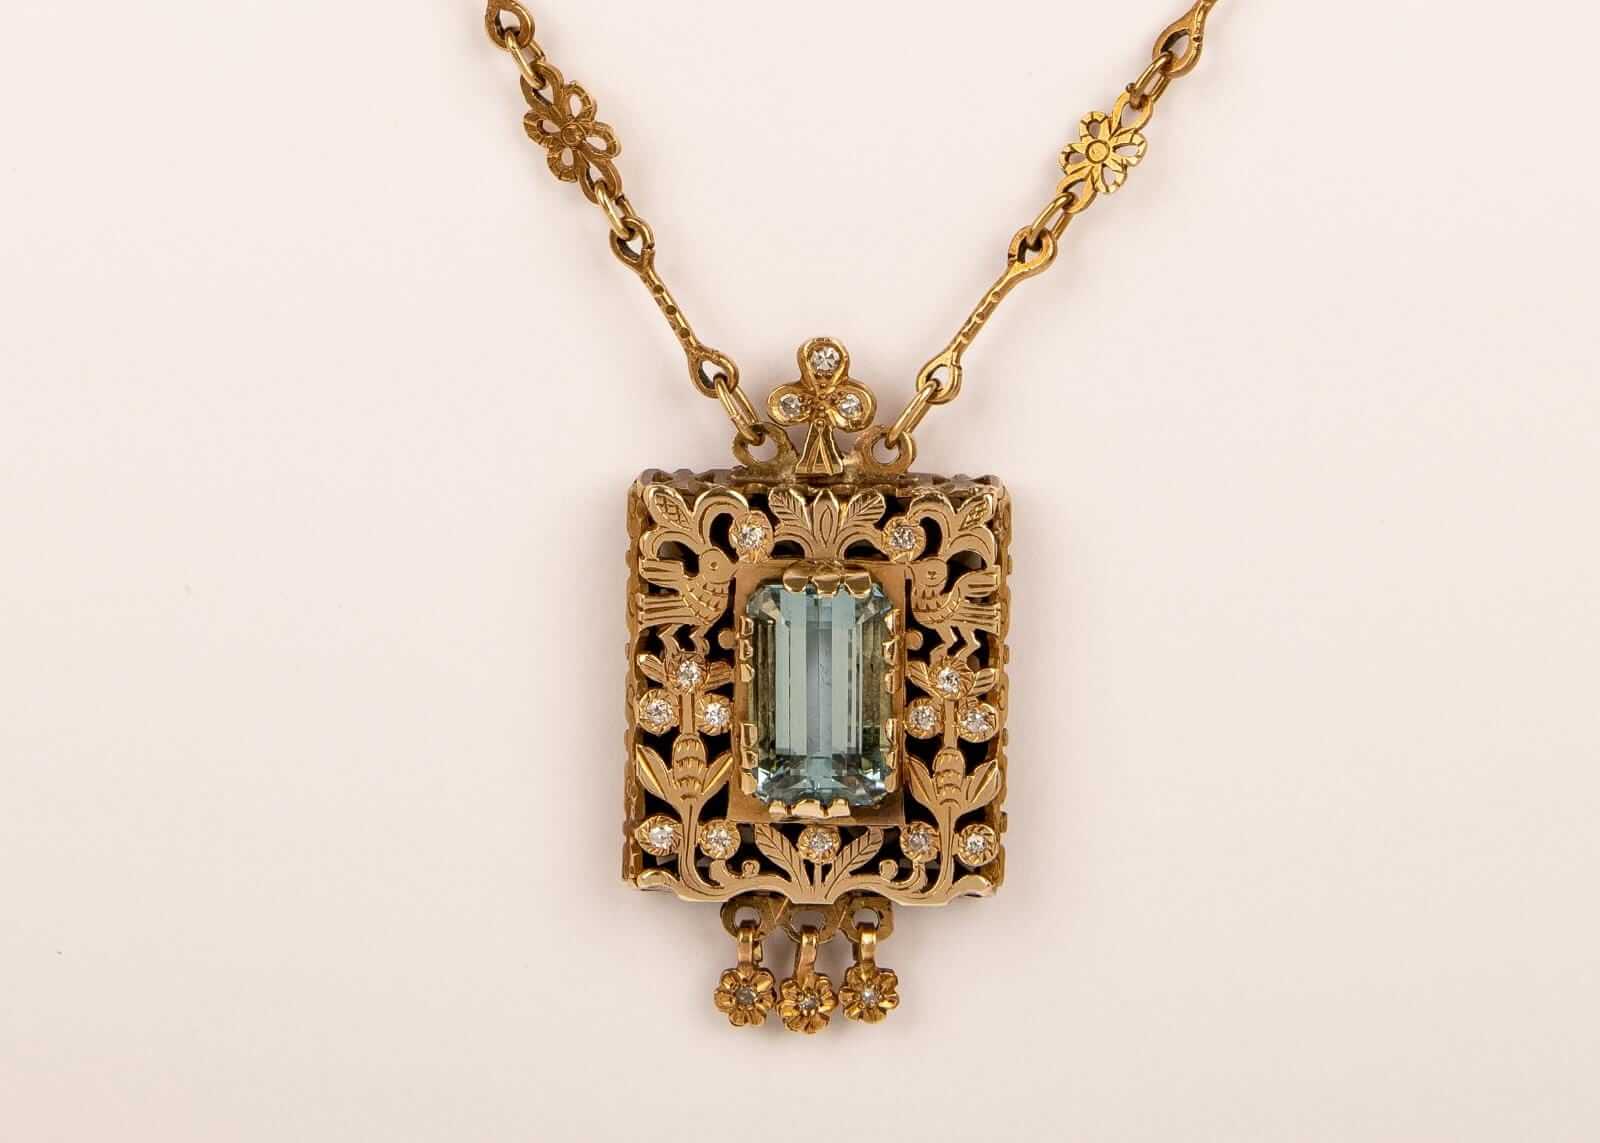 148. AN IMPORTANT GOLD PENDANT AND CHAIN BY ILYA SCHOR